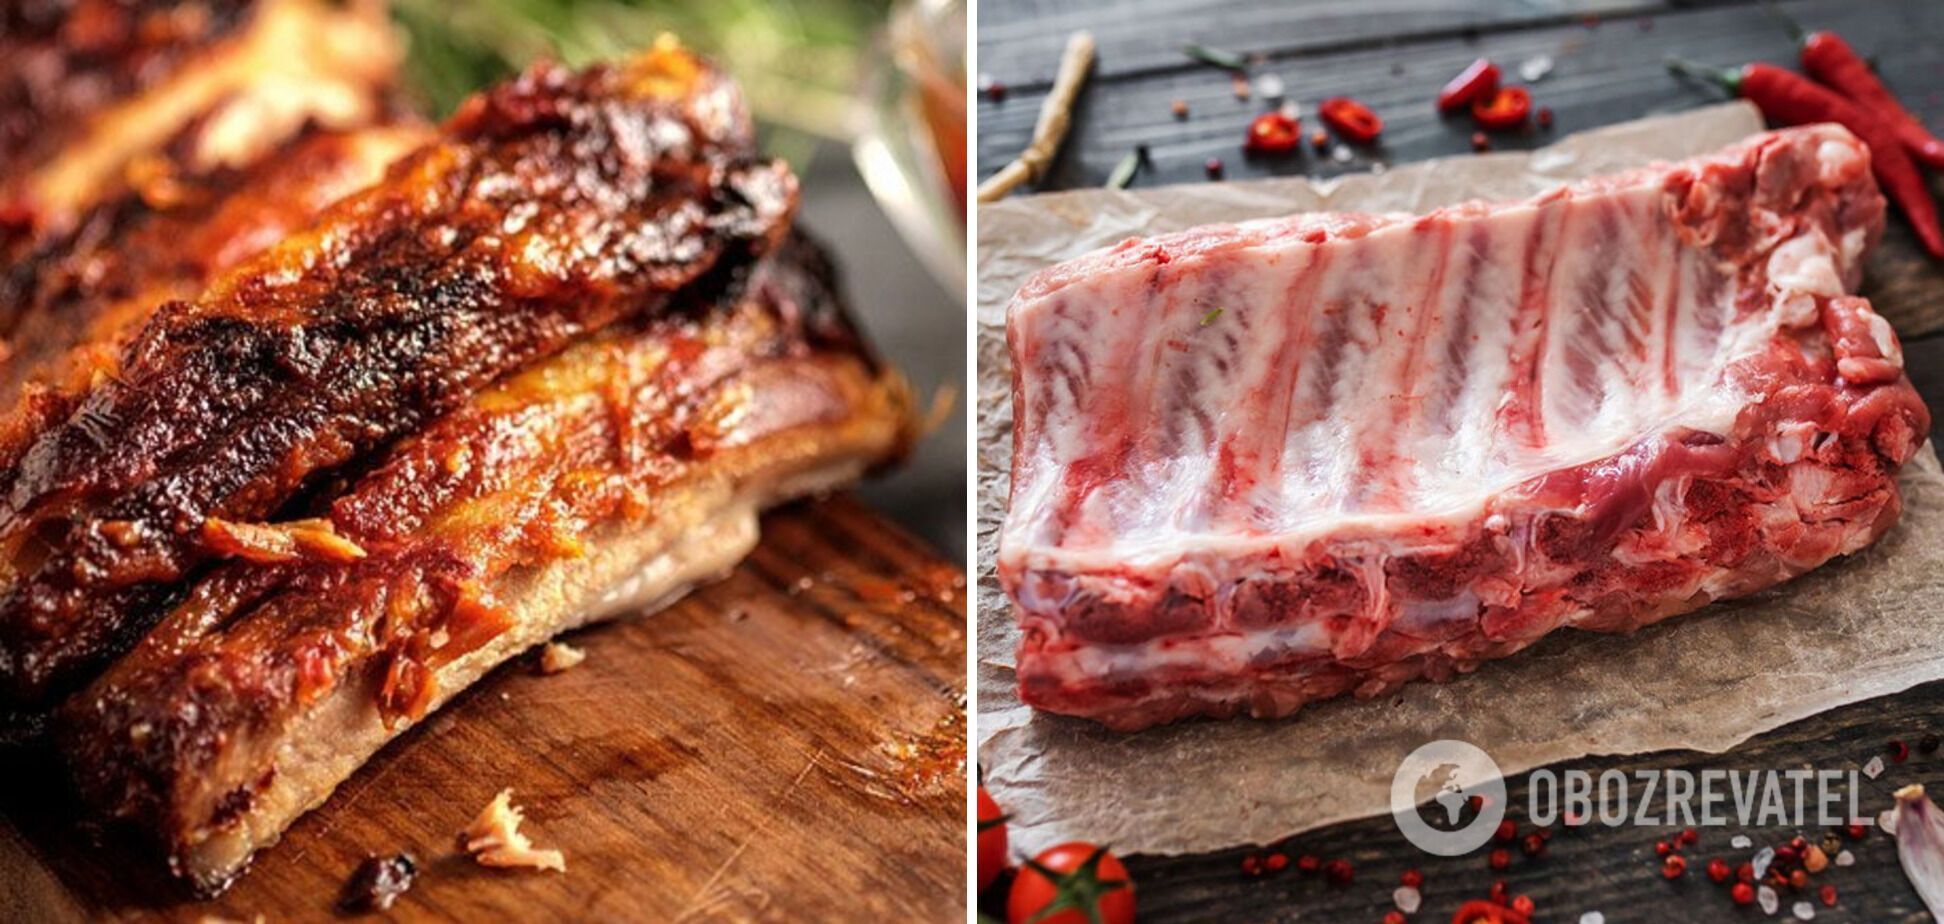 How to cook pork ribs correctly